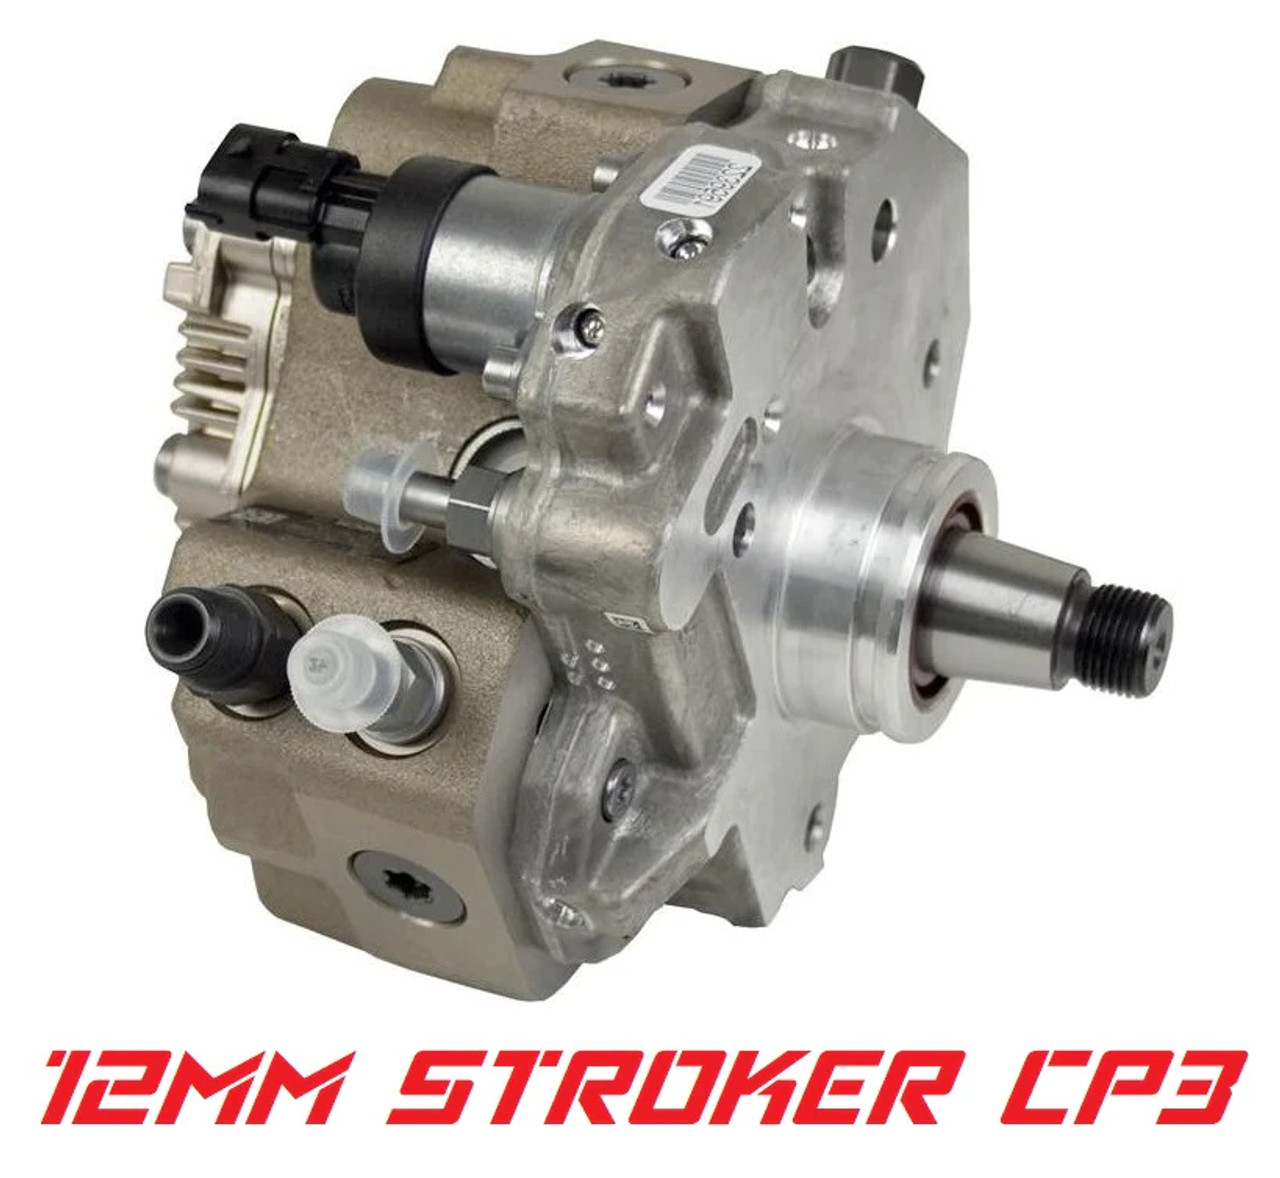 DDP BRAND NEW 12MM STROKER CP3 for 2003 to 2007 Dodge 5.9L Cummins (DDP.NCP3-30412) Main View